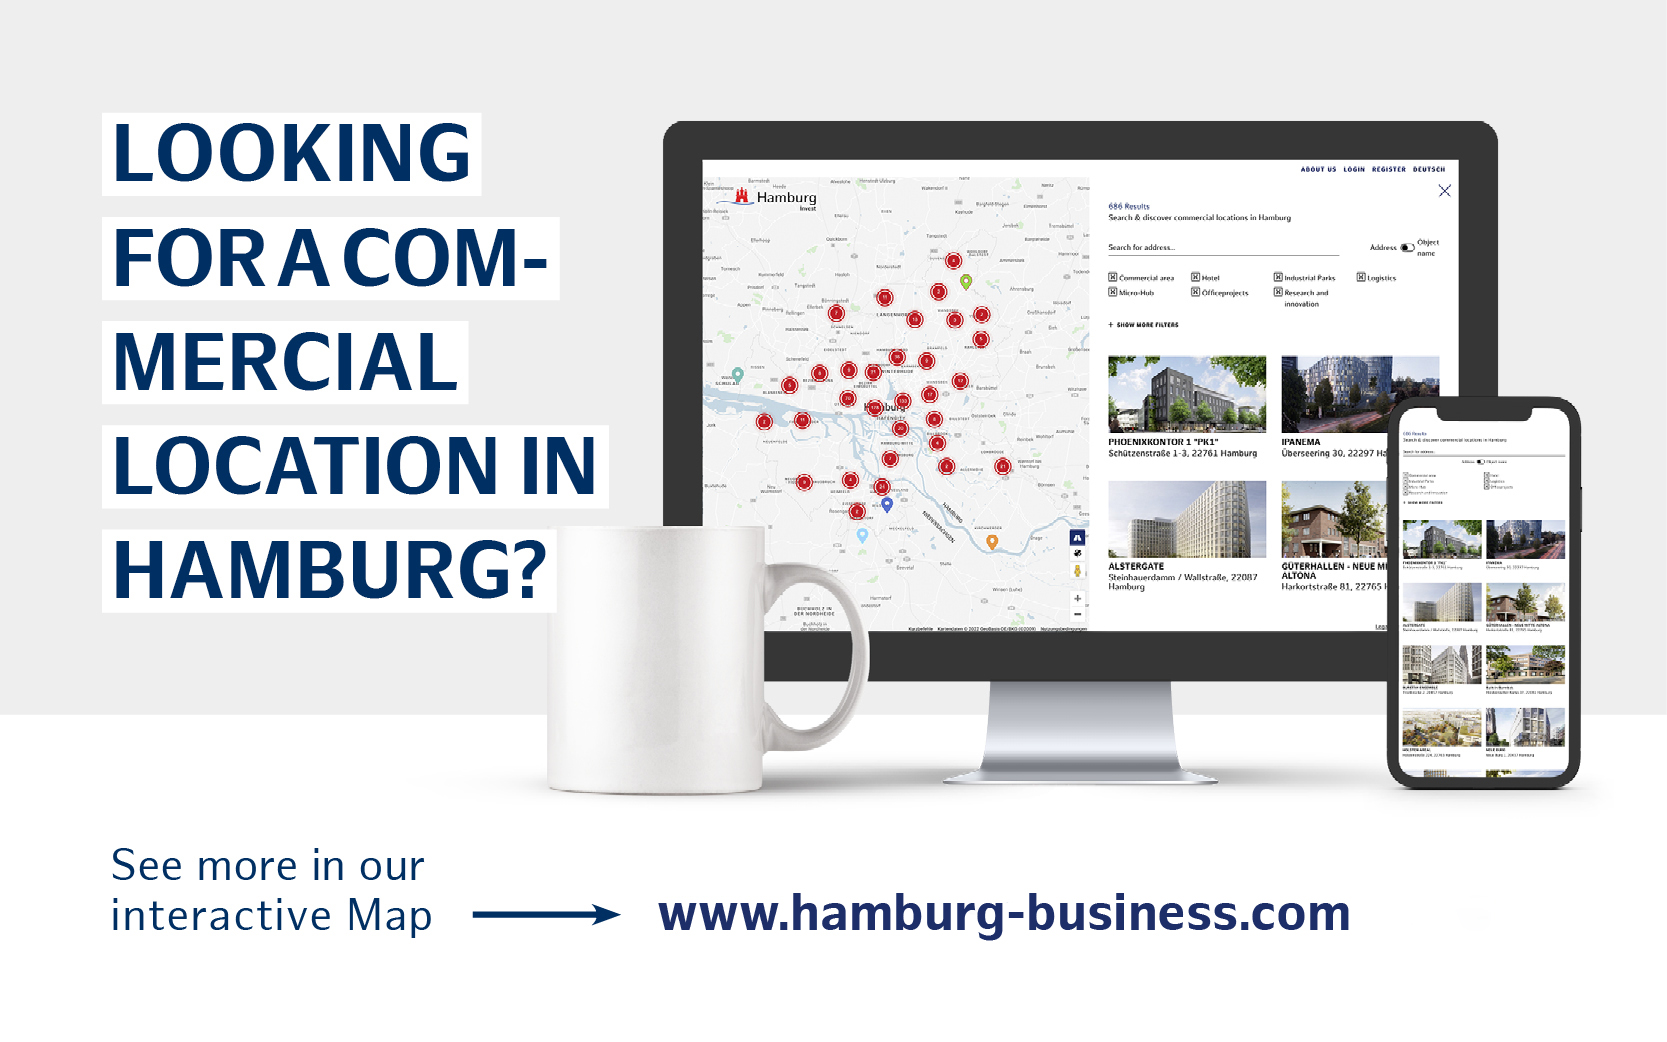 Location map by Hamburg Invest: The interactive map offers an overview of project developments, commercial locations, hotels and commercial areas in the city of Hamburg.